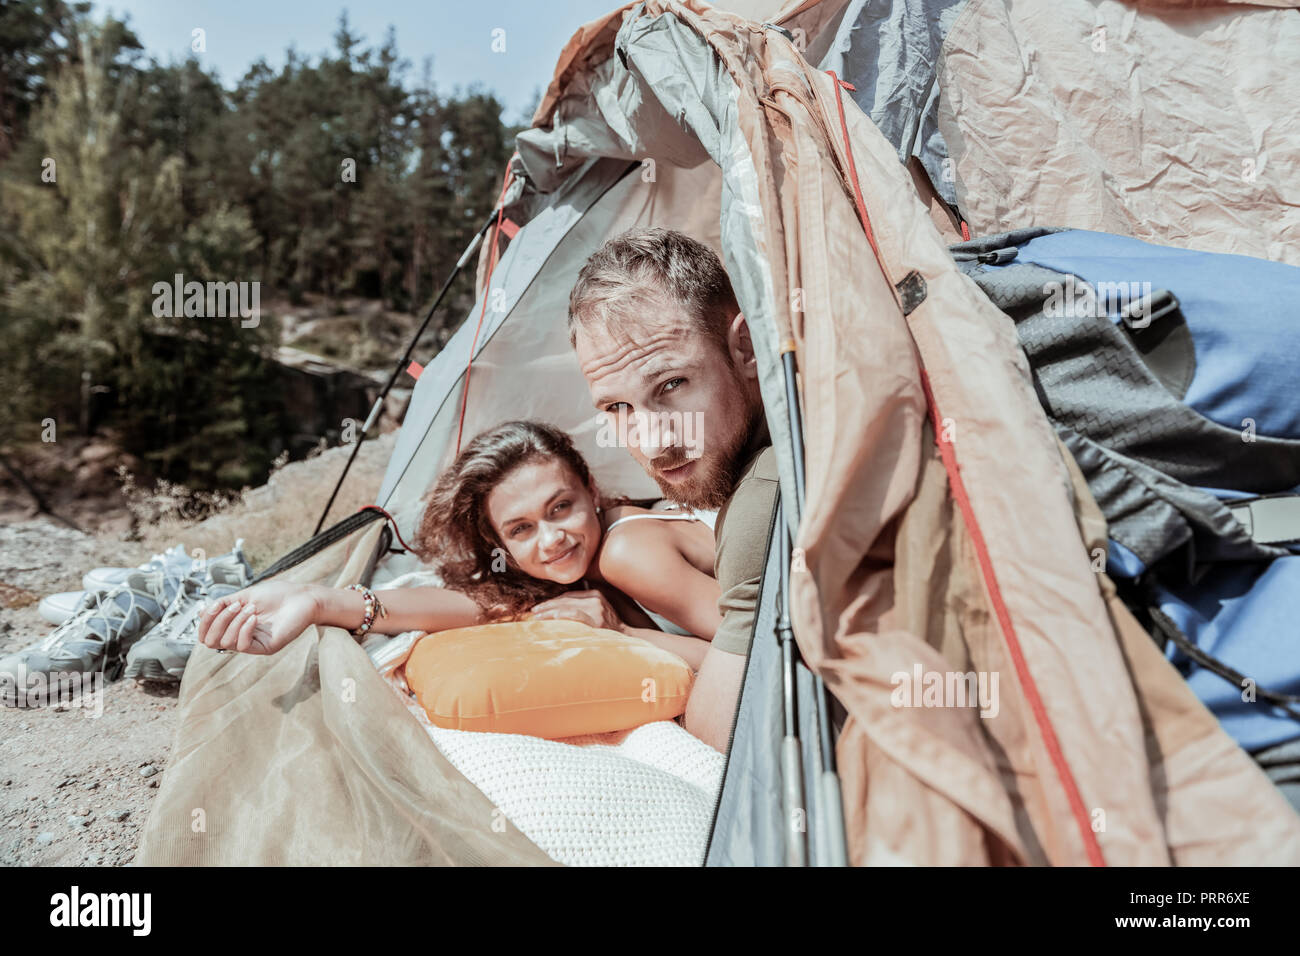 Couple of young active backpackers feeling sleepy after long cold night in tent Stock Photo